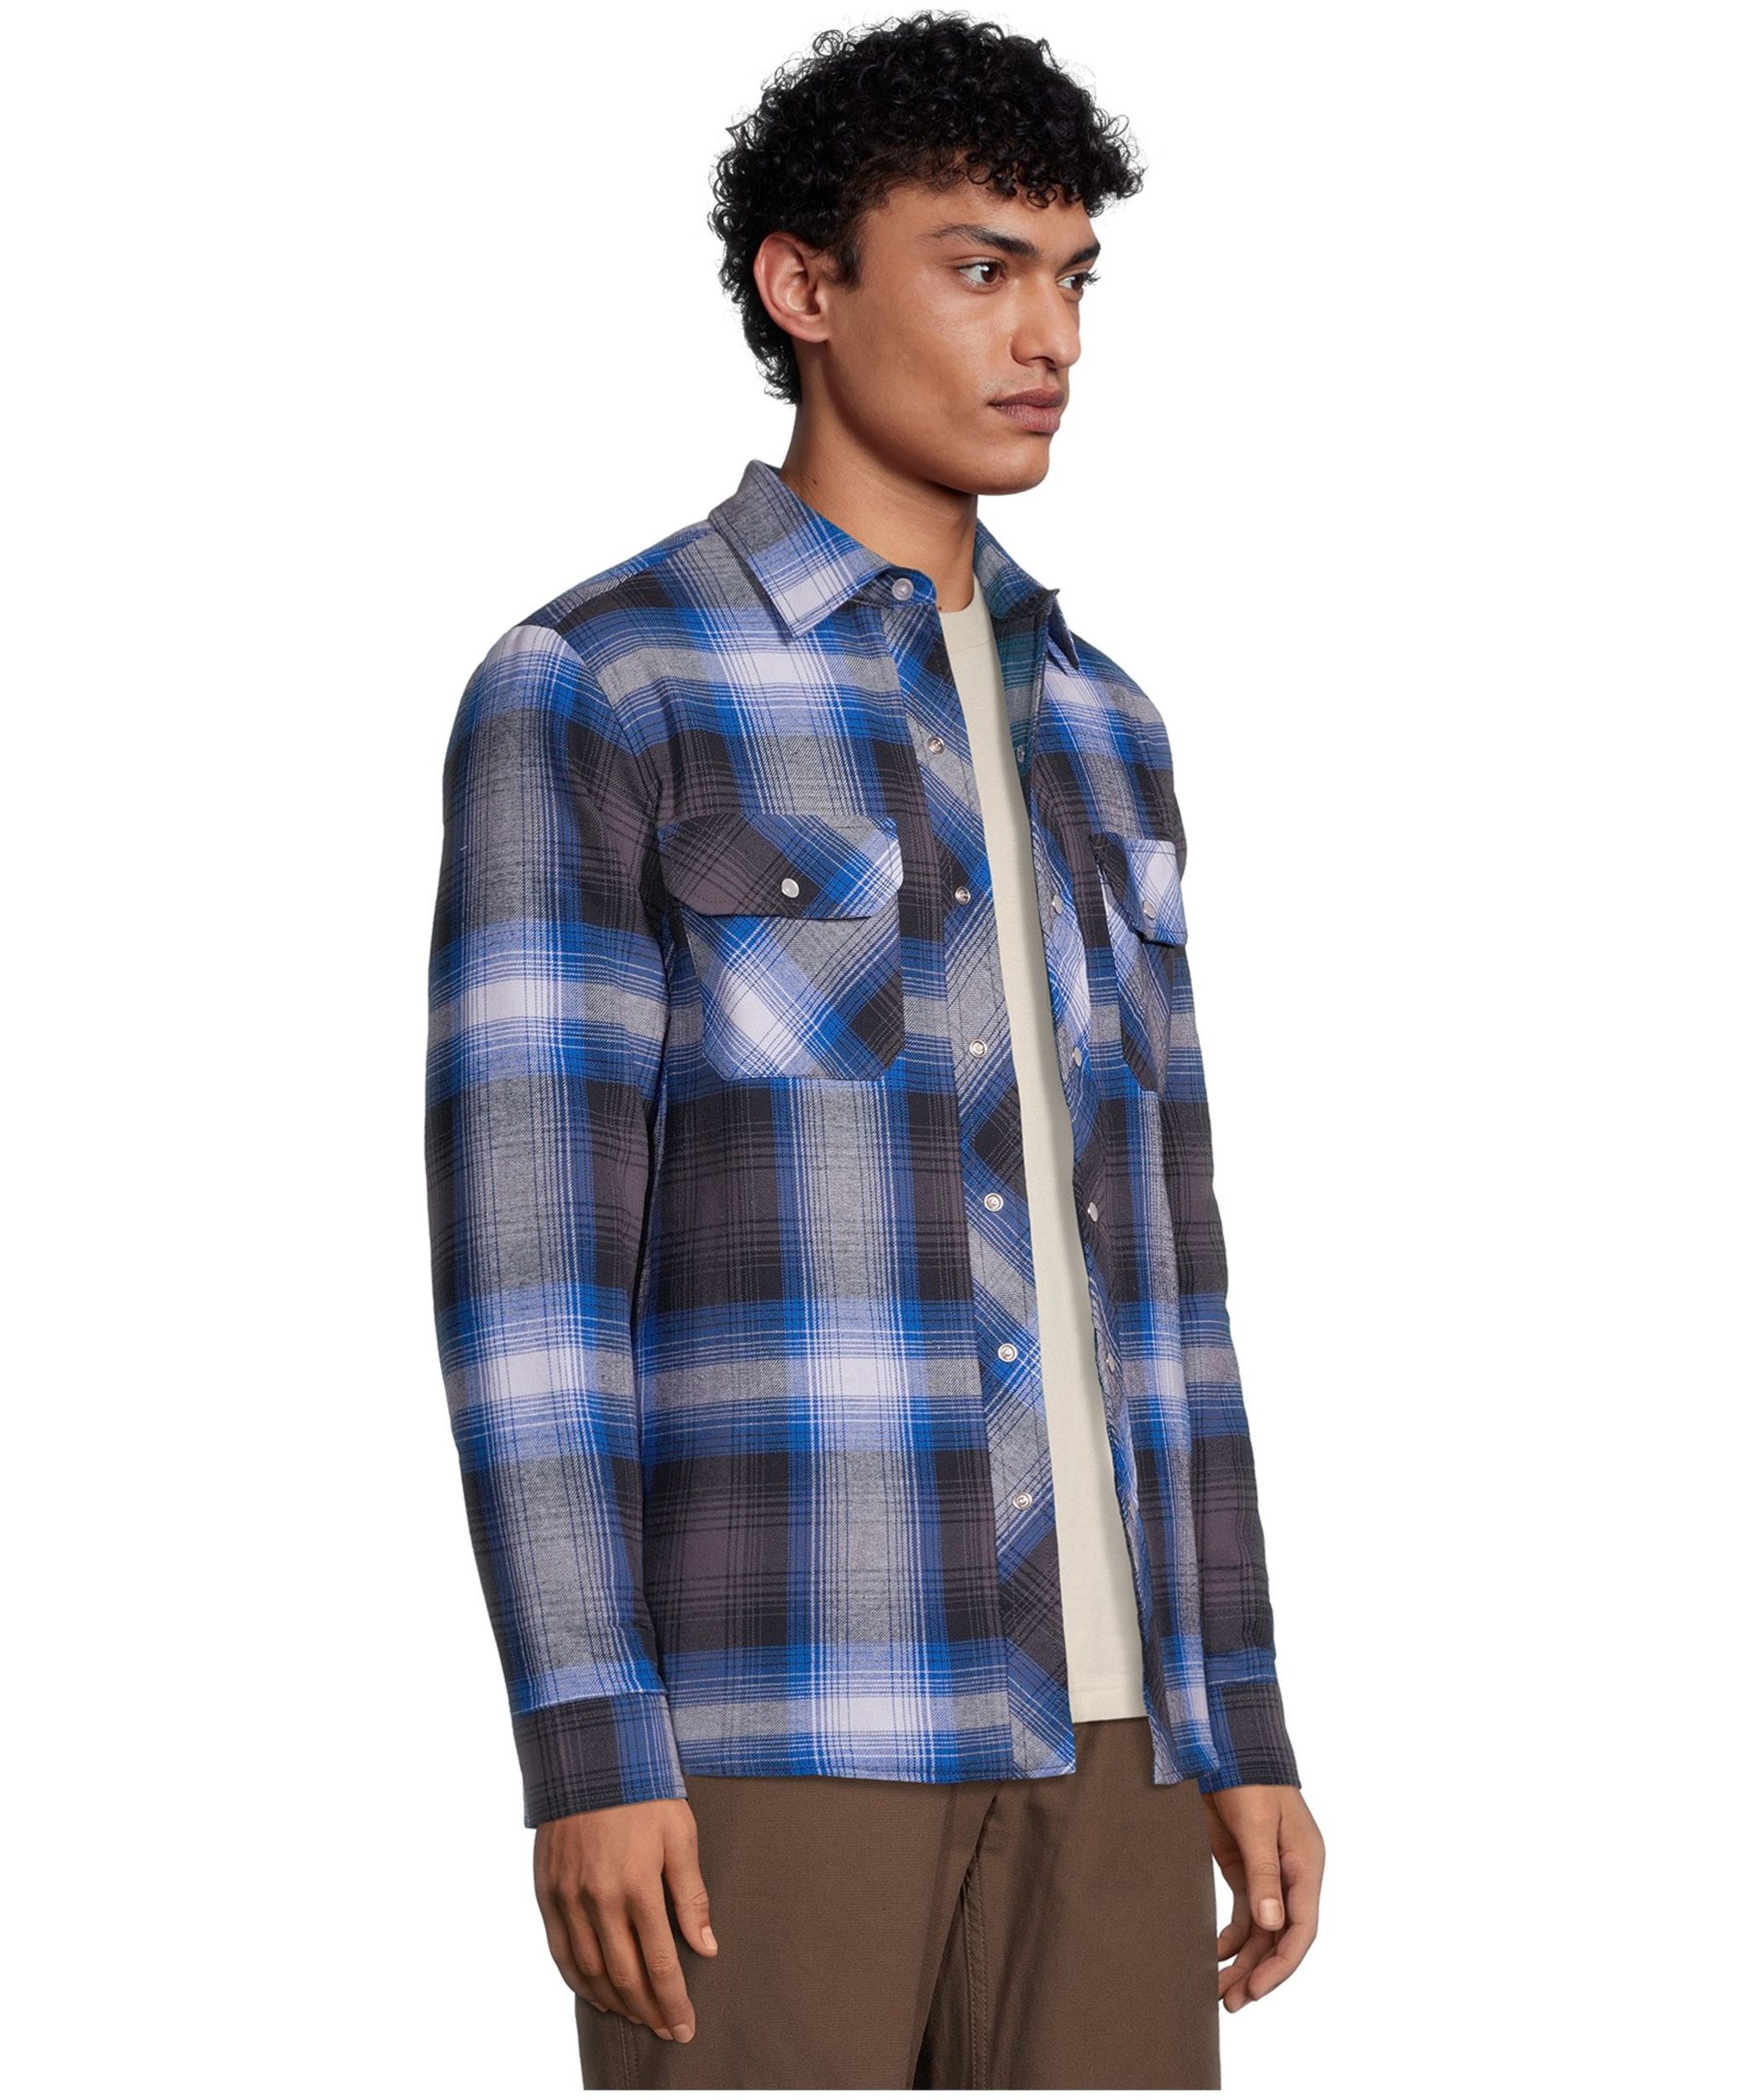 Aggressor Men's Snap-Front Plaid Quilted Flannel Work Shirt | Marks